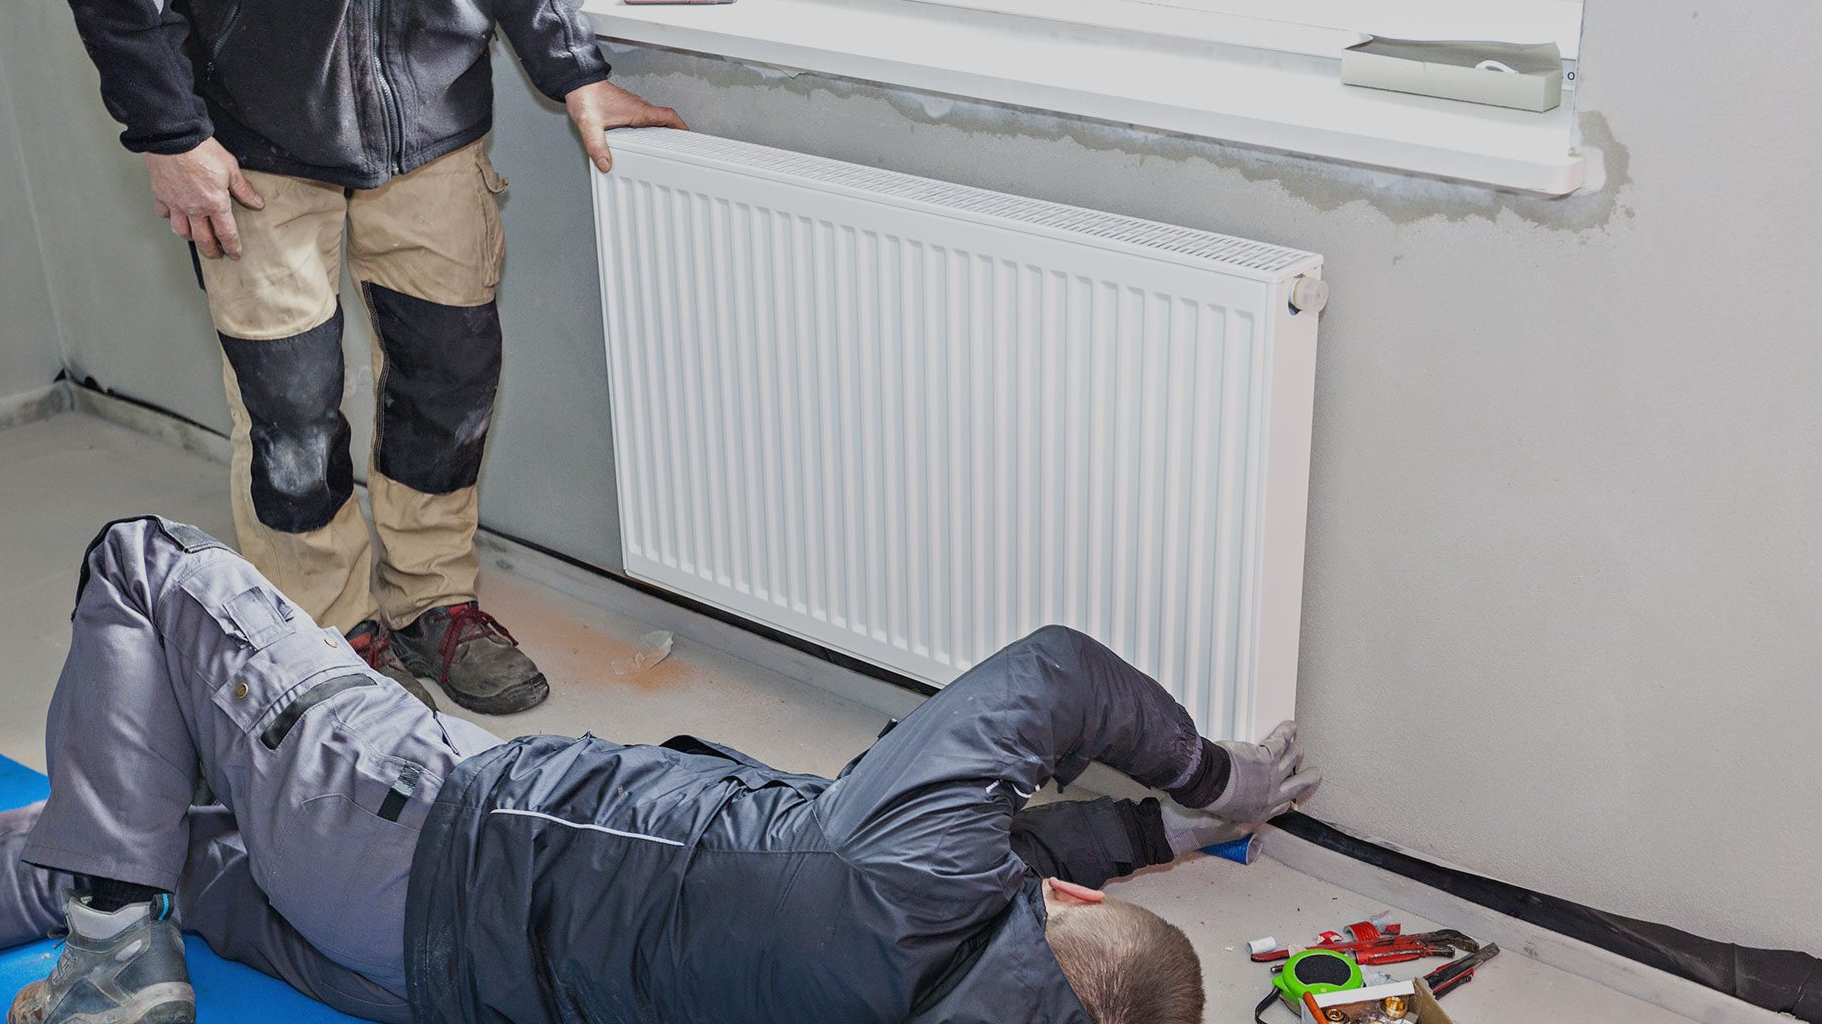 Hydronic heating maintenance: Benefits and best practices